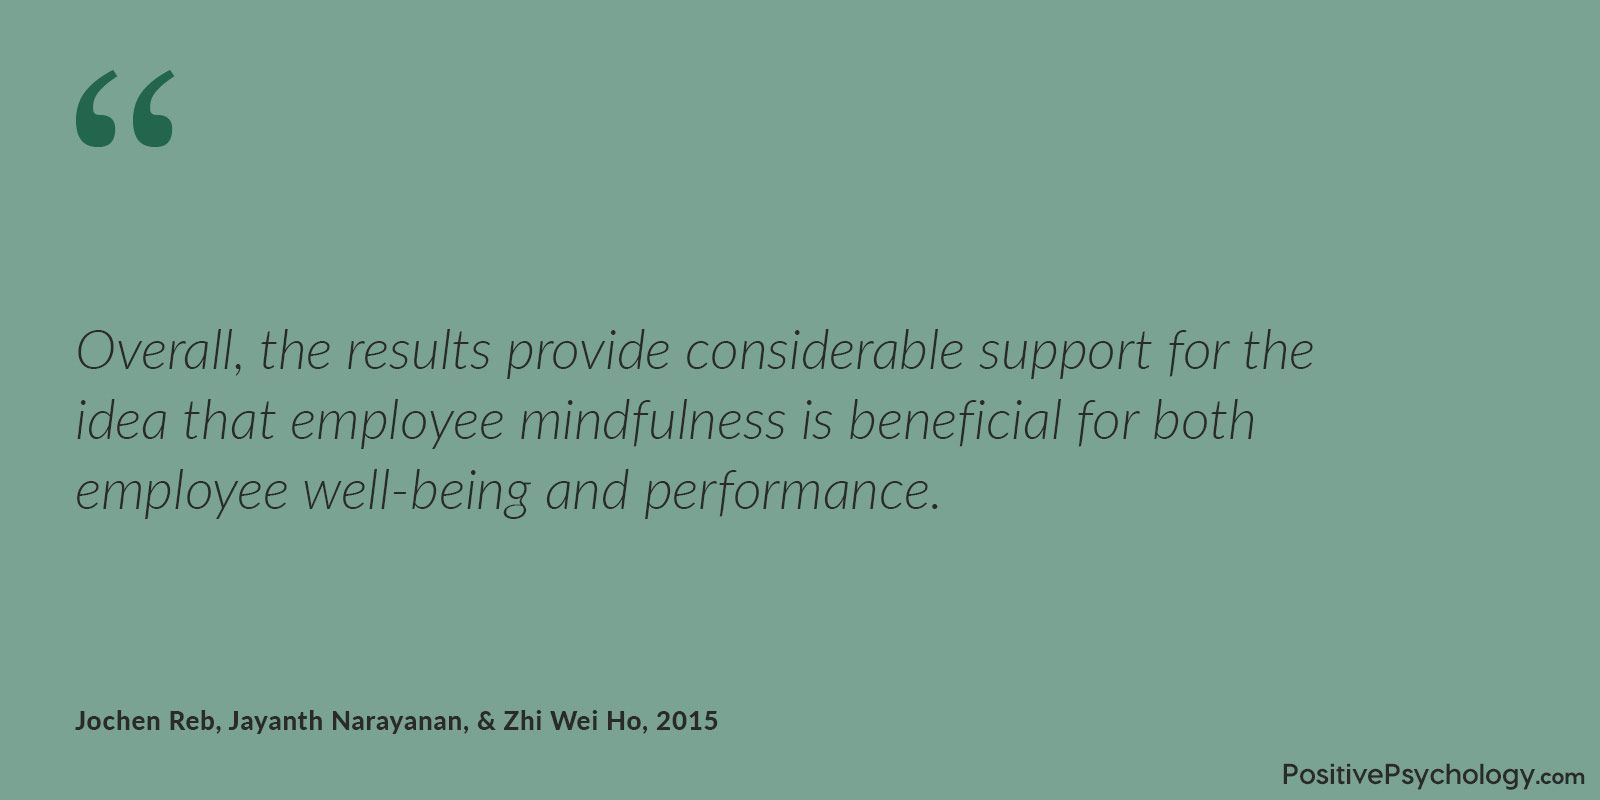 Employee mindfulness is beneficial